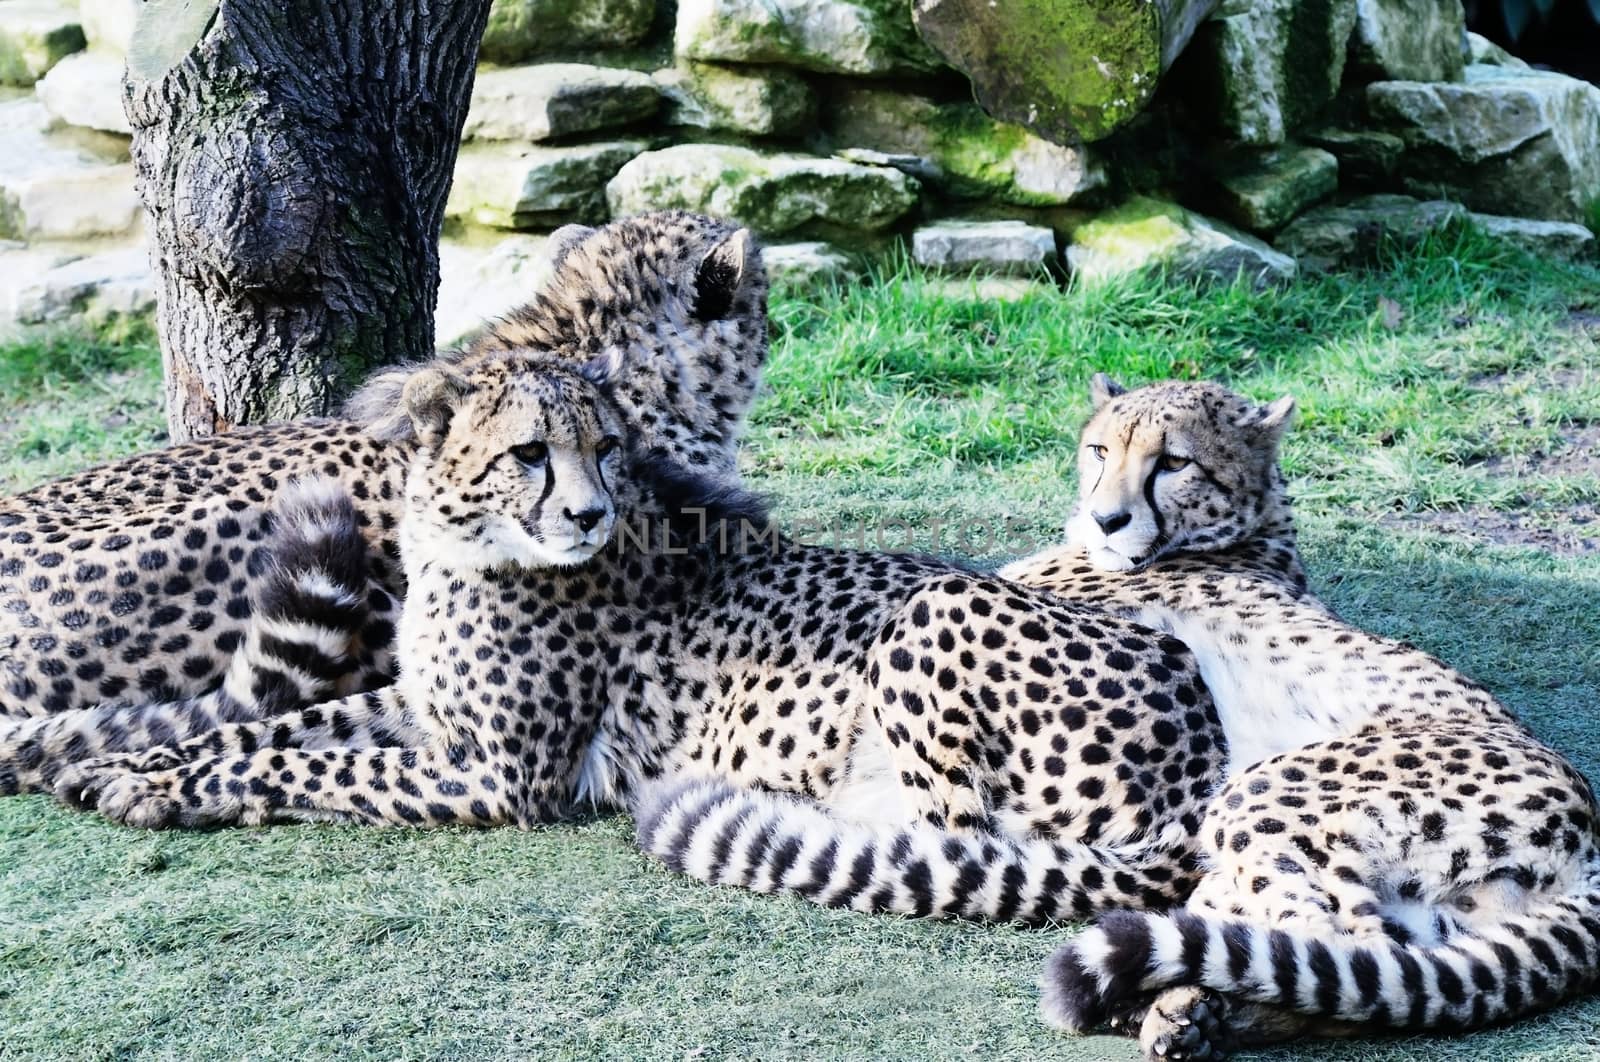 Cheetah relax in sunshine three together with spots on fur